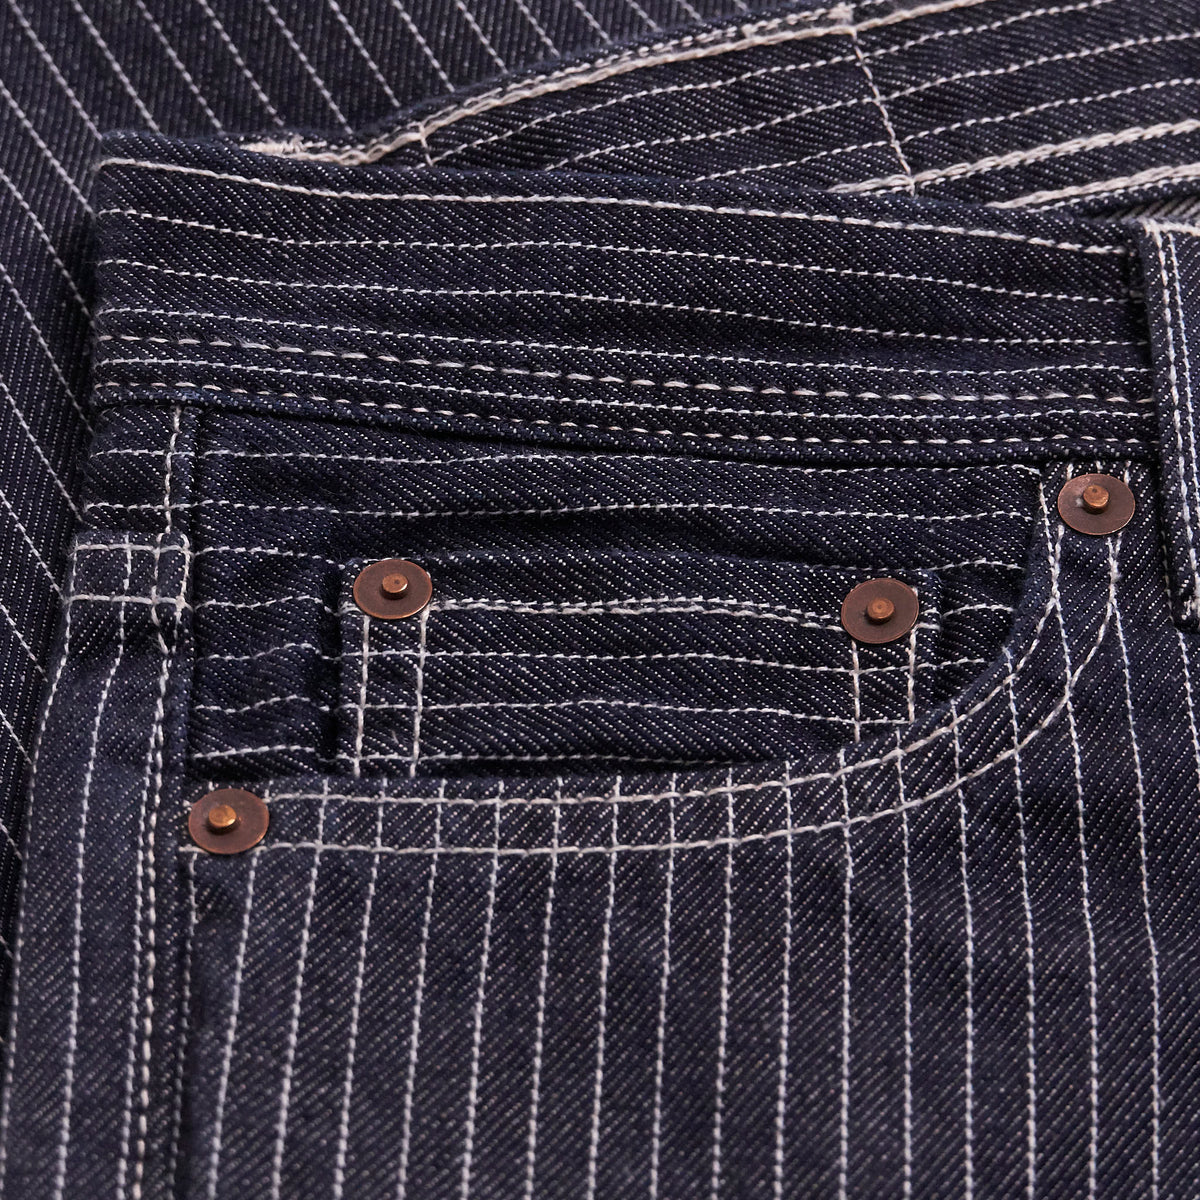 Stronghold Blue Pinstripe Selvage Denim Jeans (Rinsed)